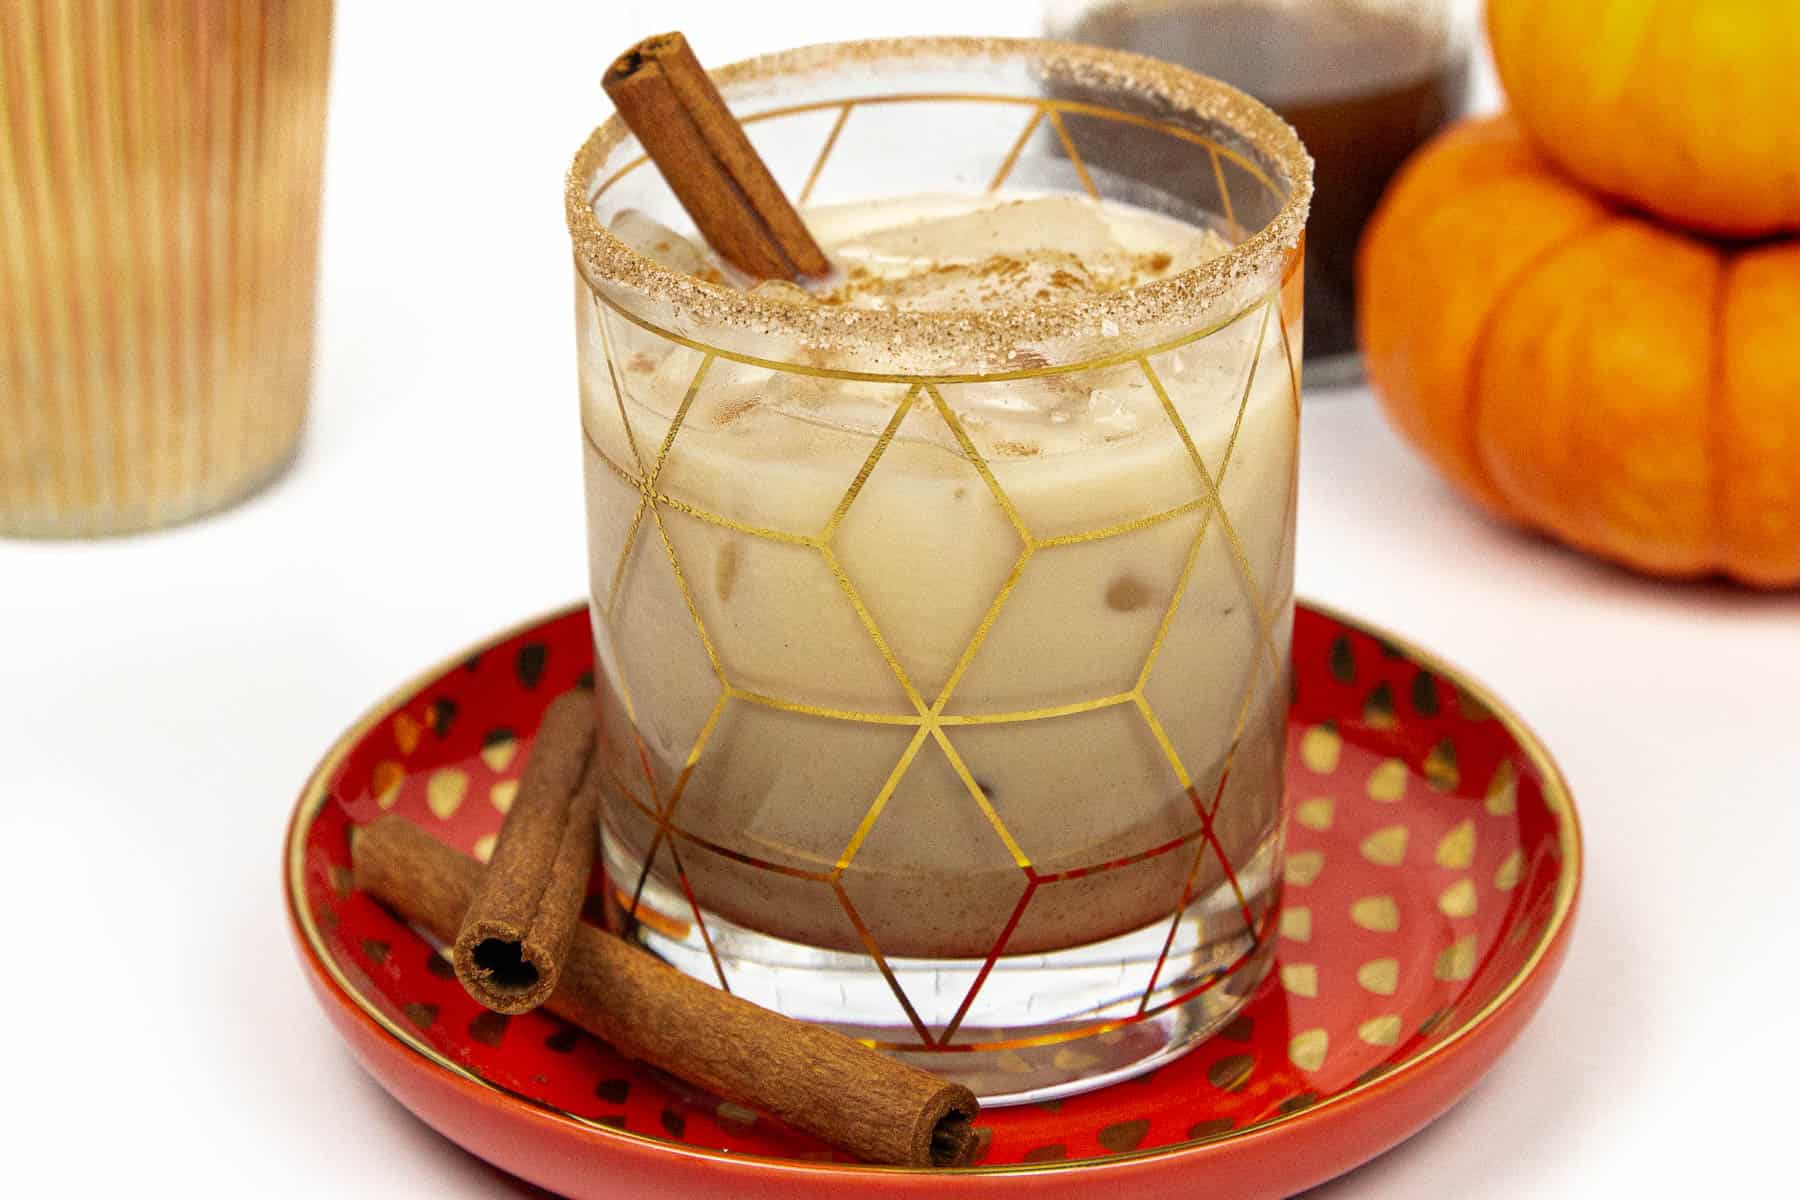 A pumpkin spiced white russian on a plate with cinnamon sticks.